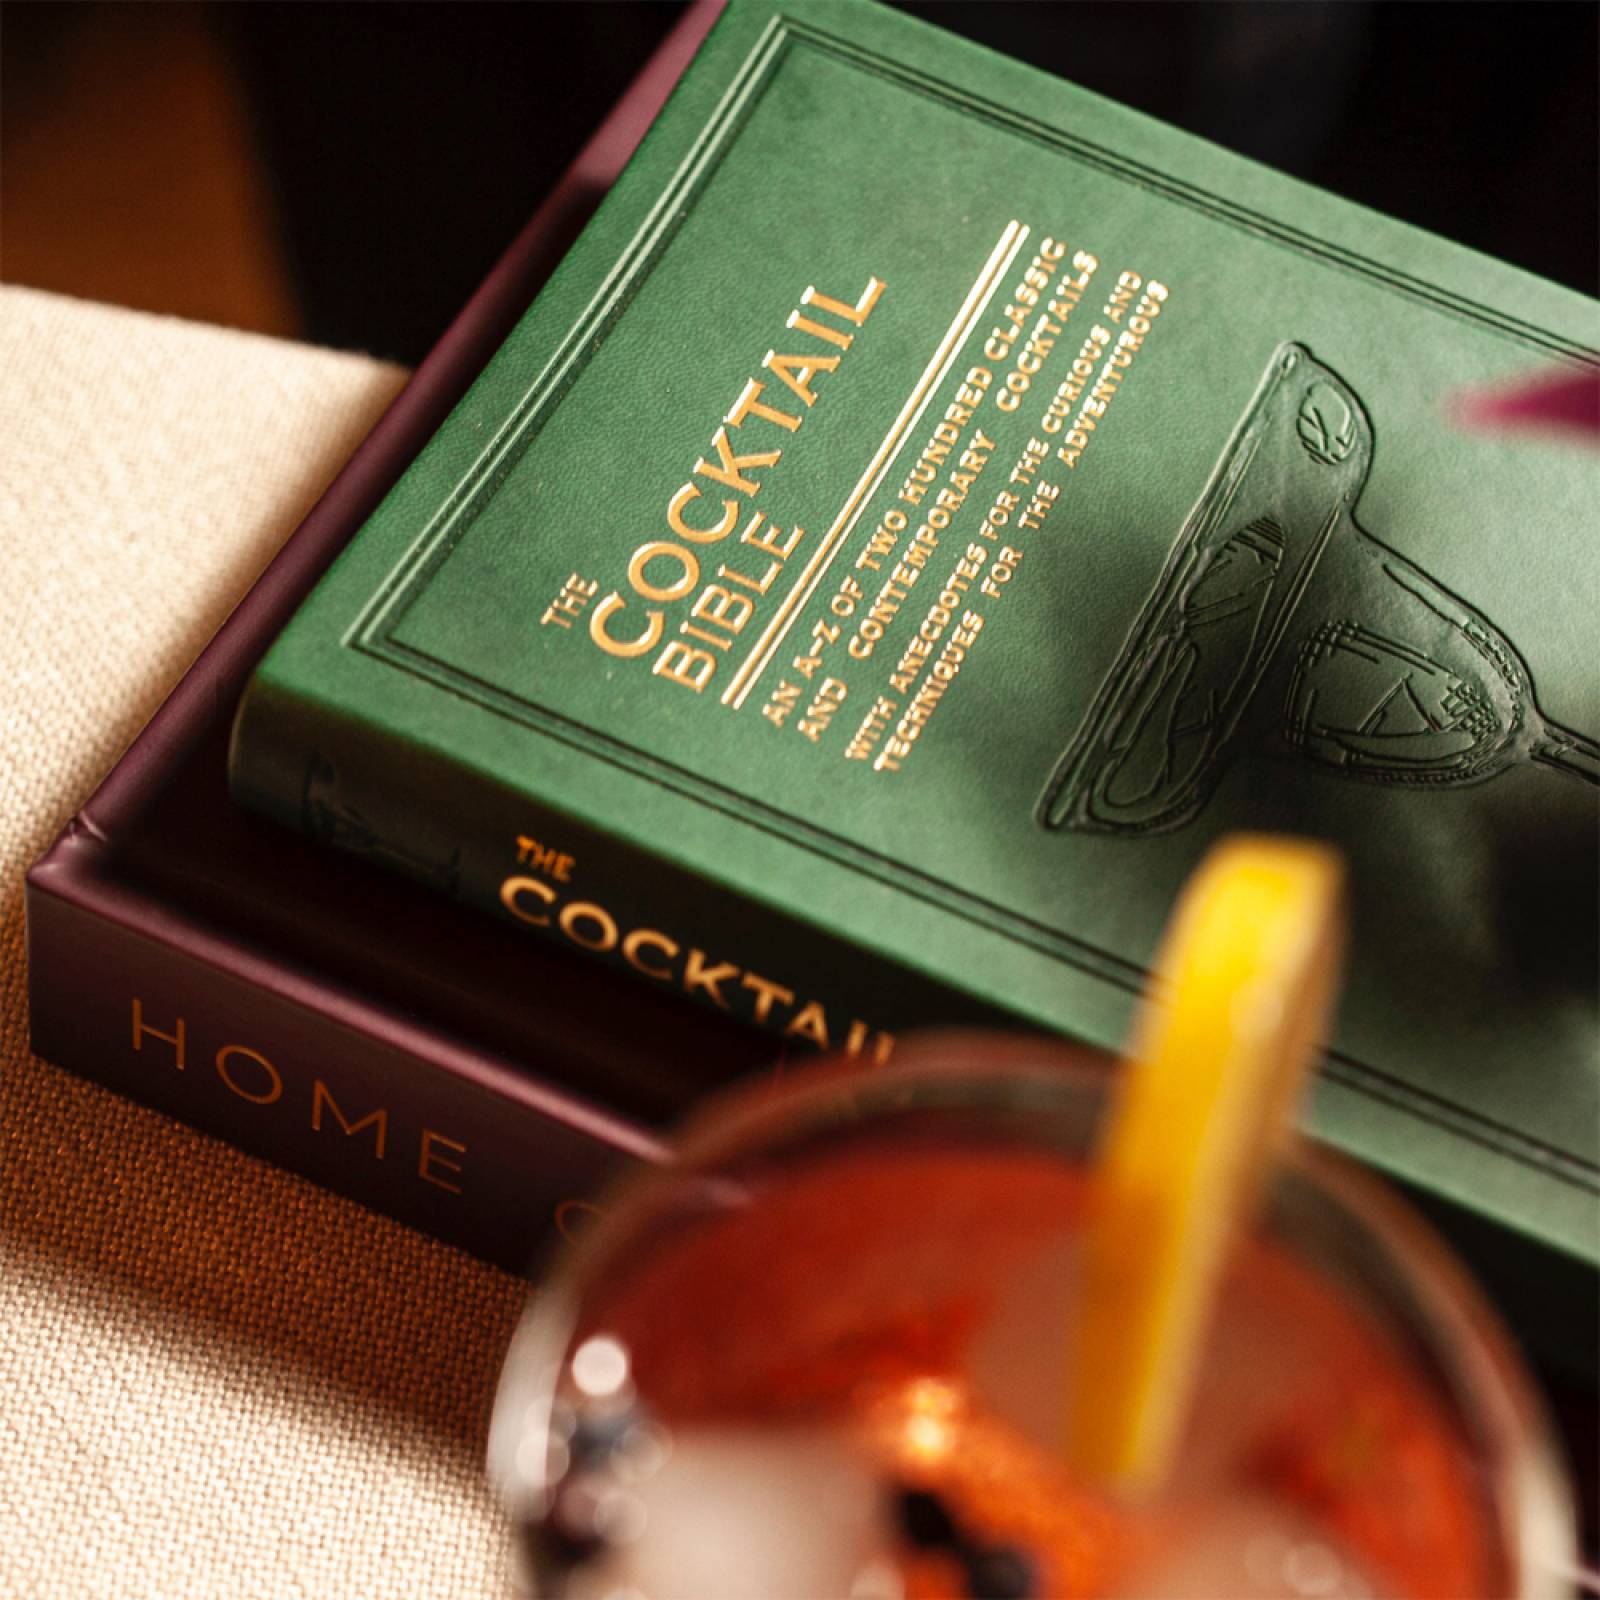 The Cocktail Bible - Paperback Book thumbnails